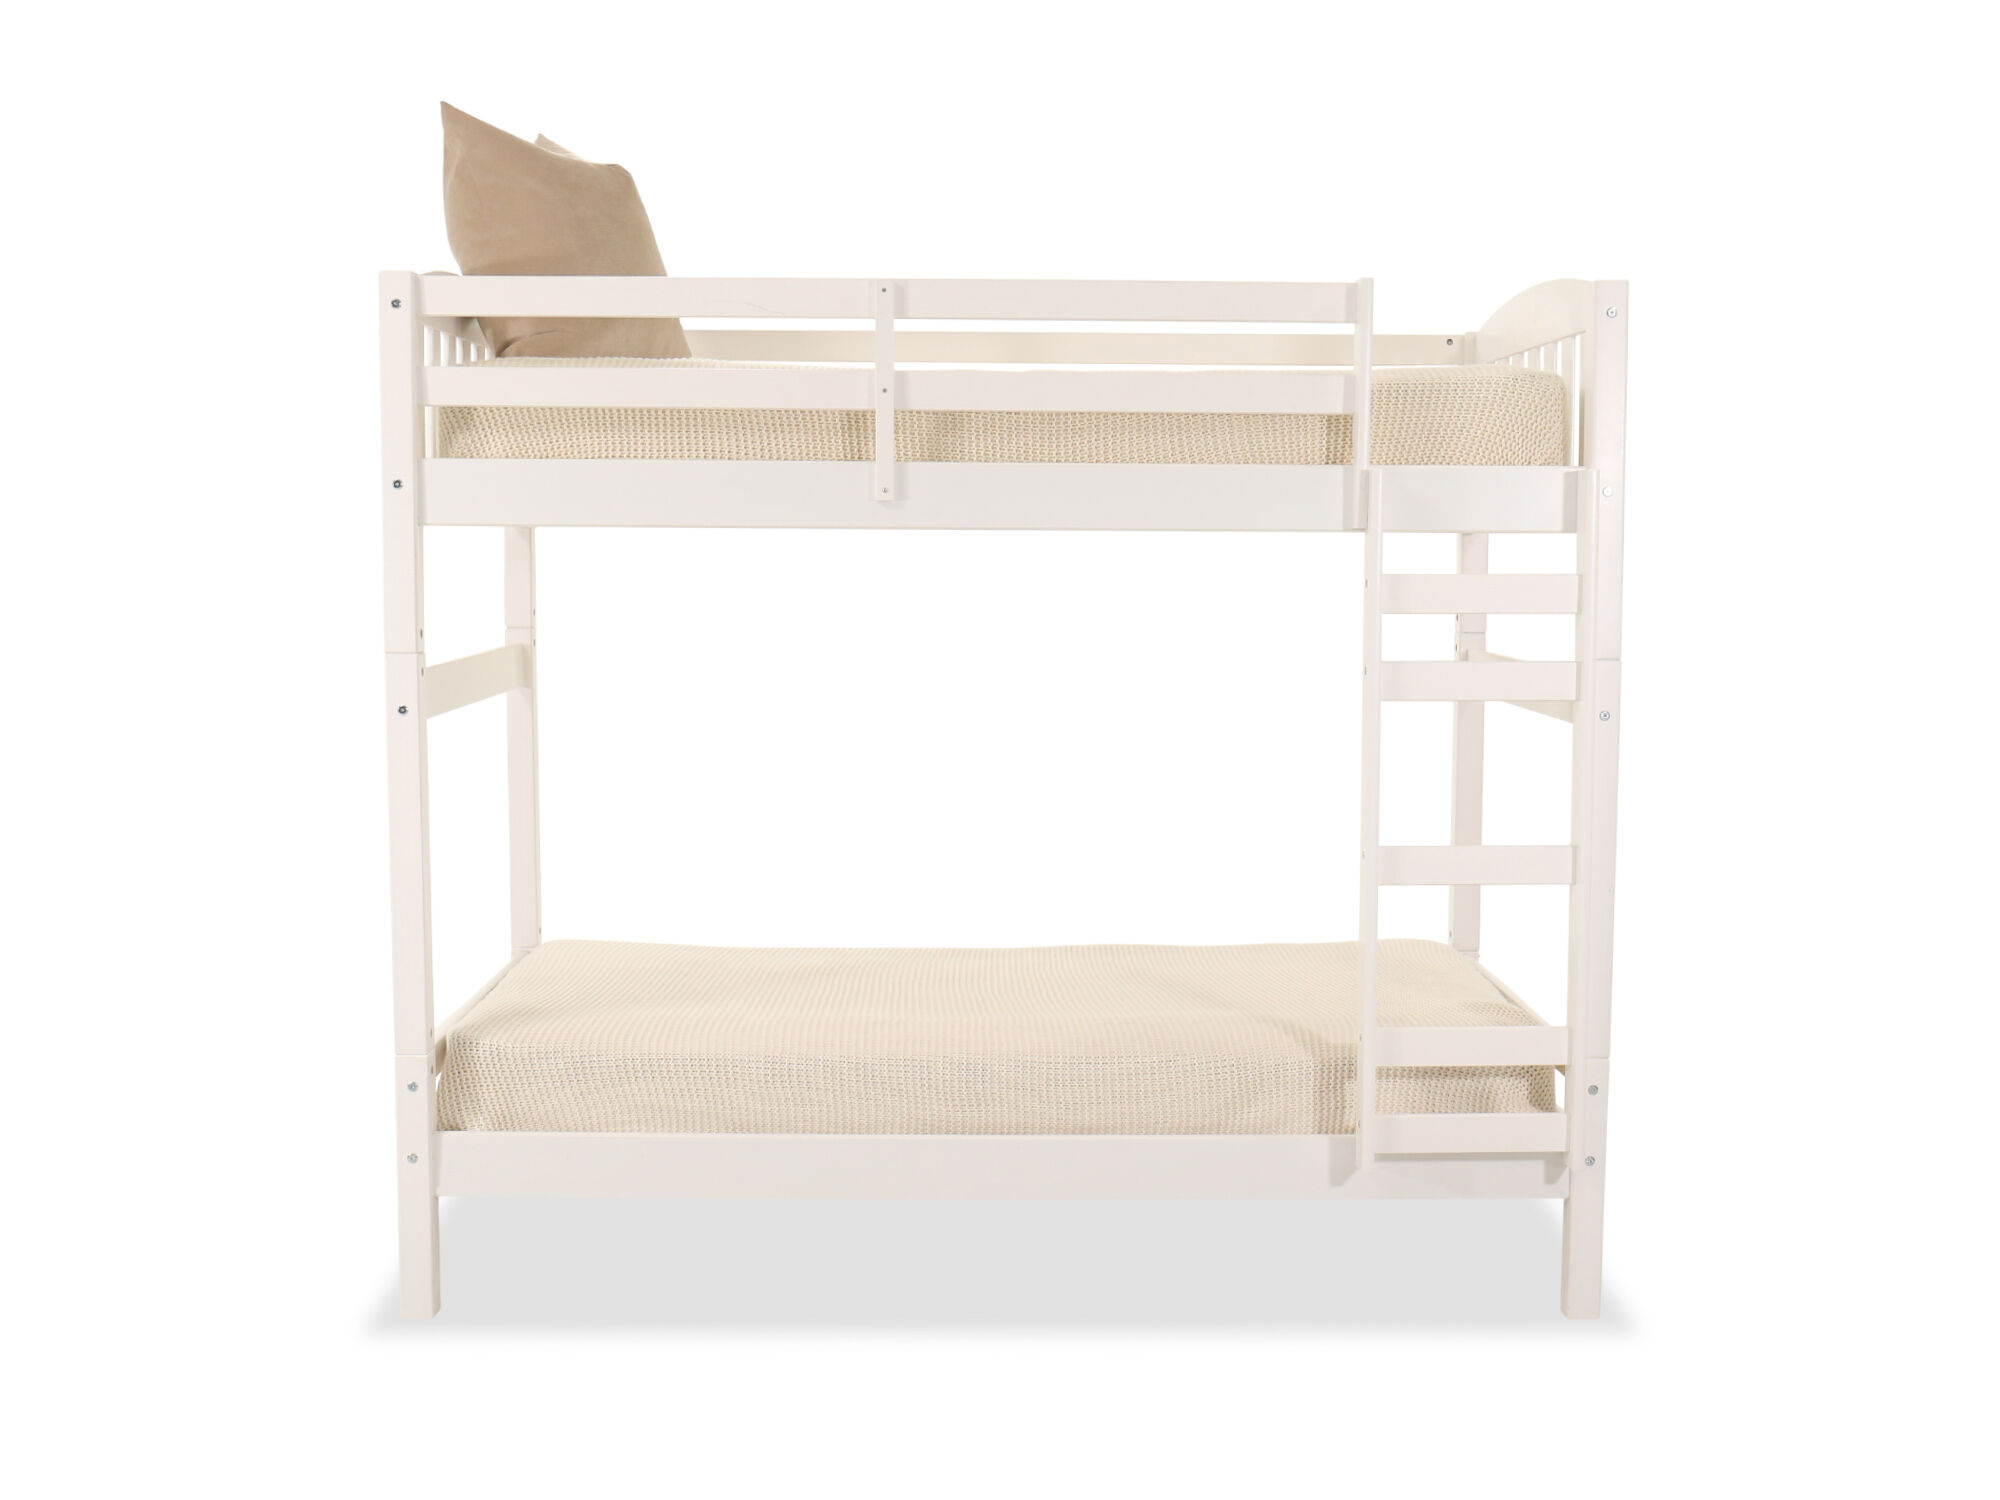 70 Modern Convertible Bunk Bed In, Mathis Brothers Bunk Beds